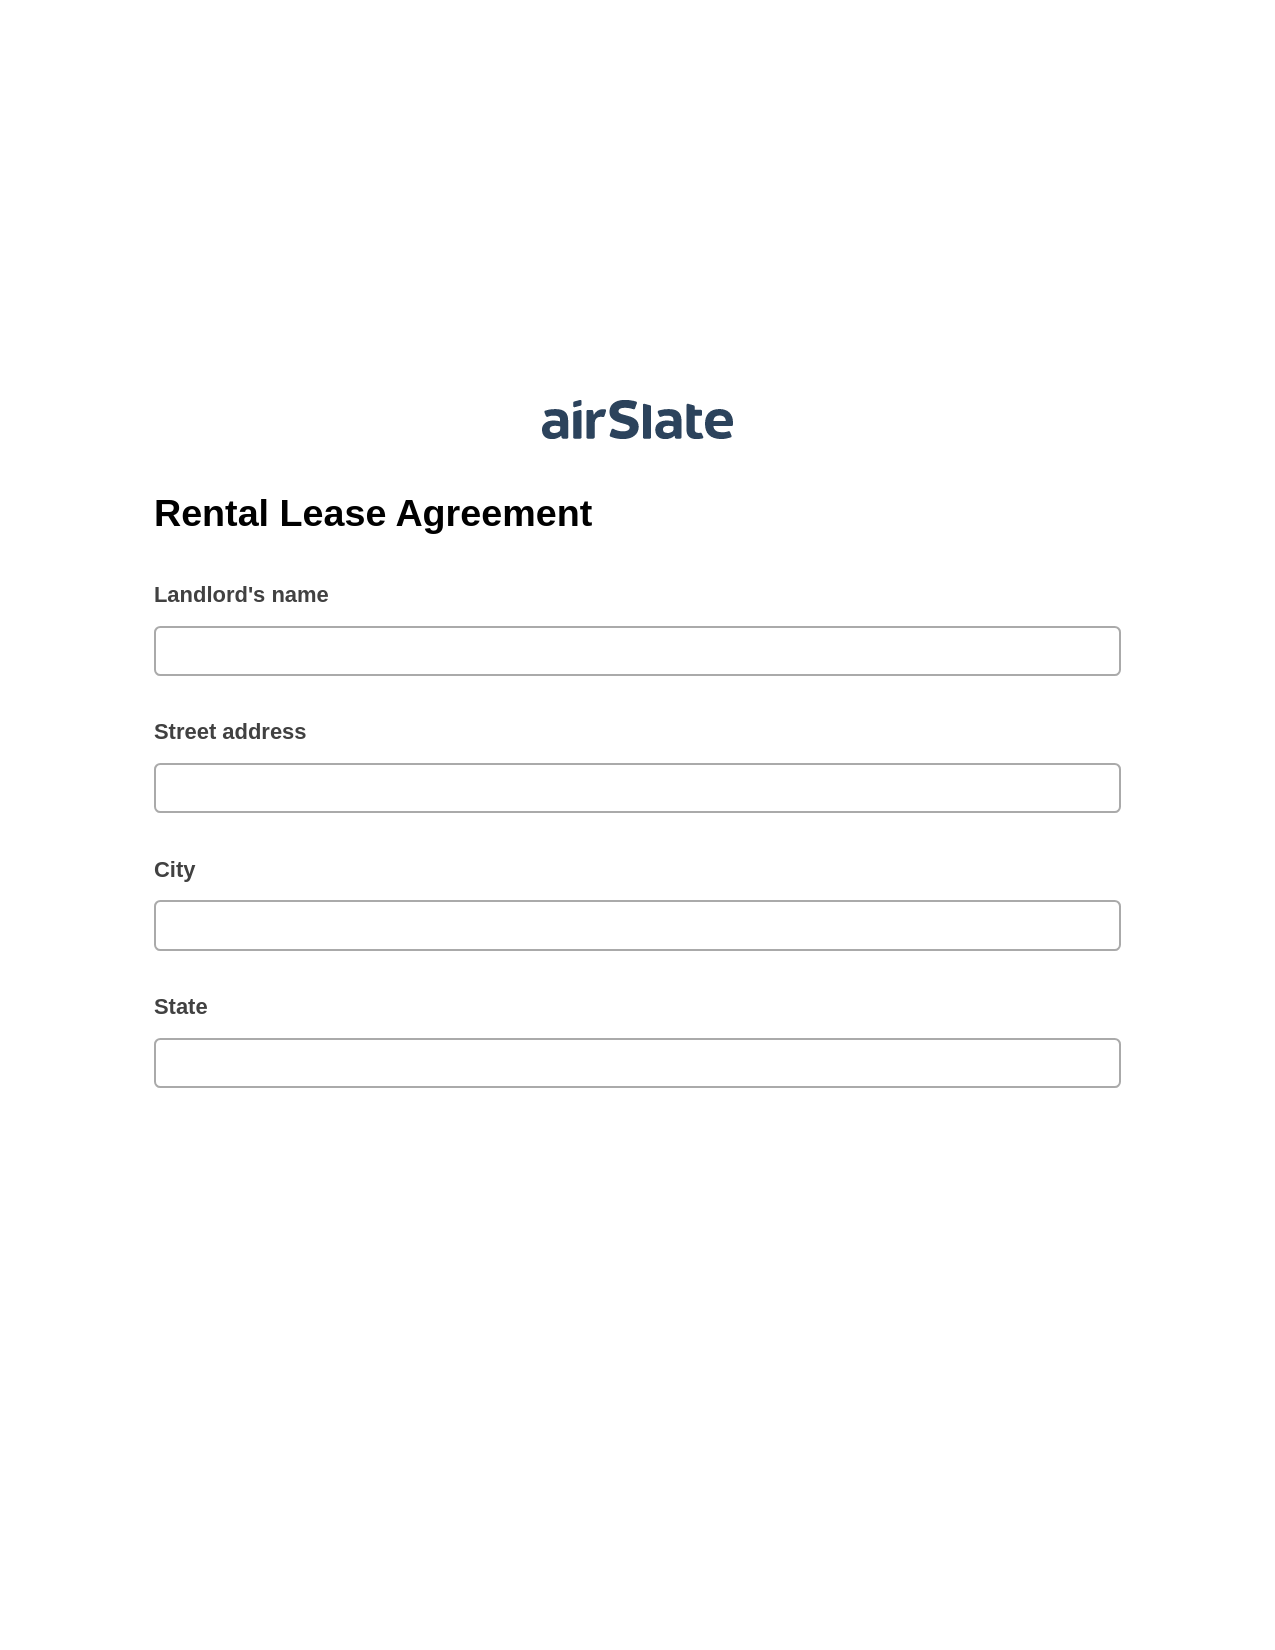 Rental Lease Agreement Pre-fill from MySQL Dropdown Options Bot, Lock the slate bot, Export to Google Sheet Bot